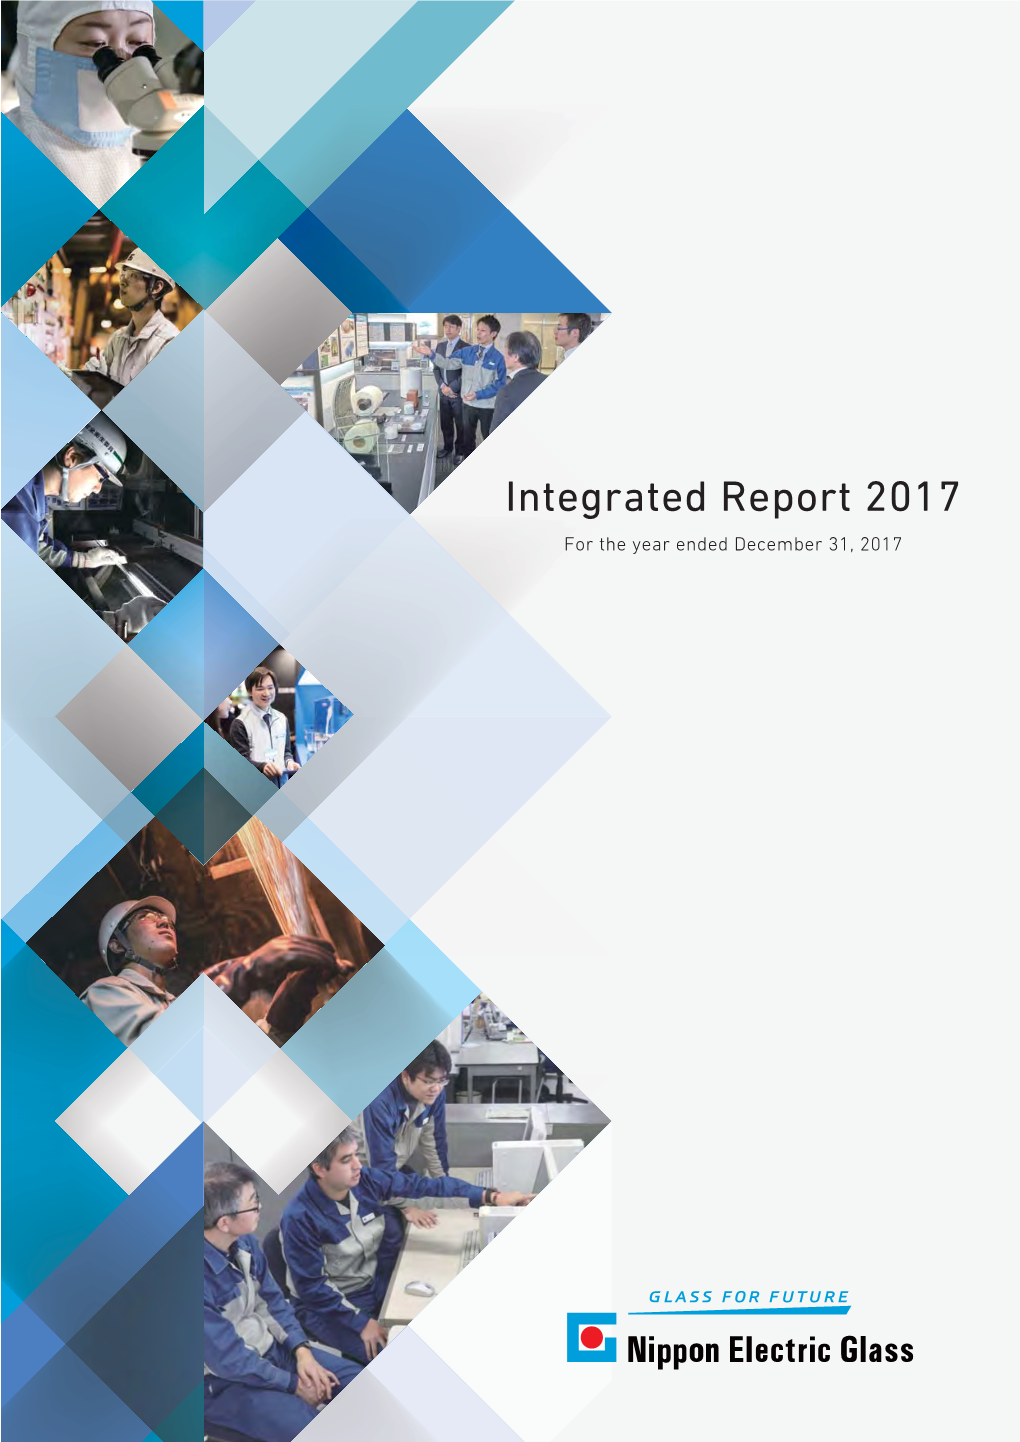 Integrated Report 2017 for the Year Ended December 31, 2017 on the Publication of the Integrated Report 2017